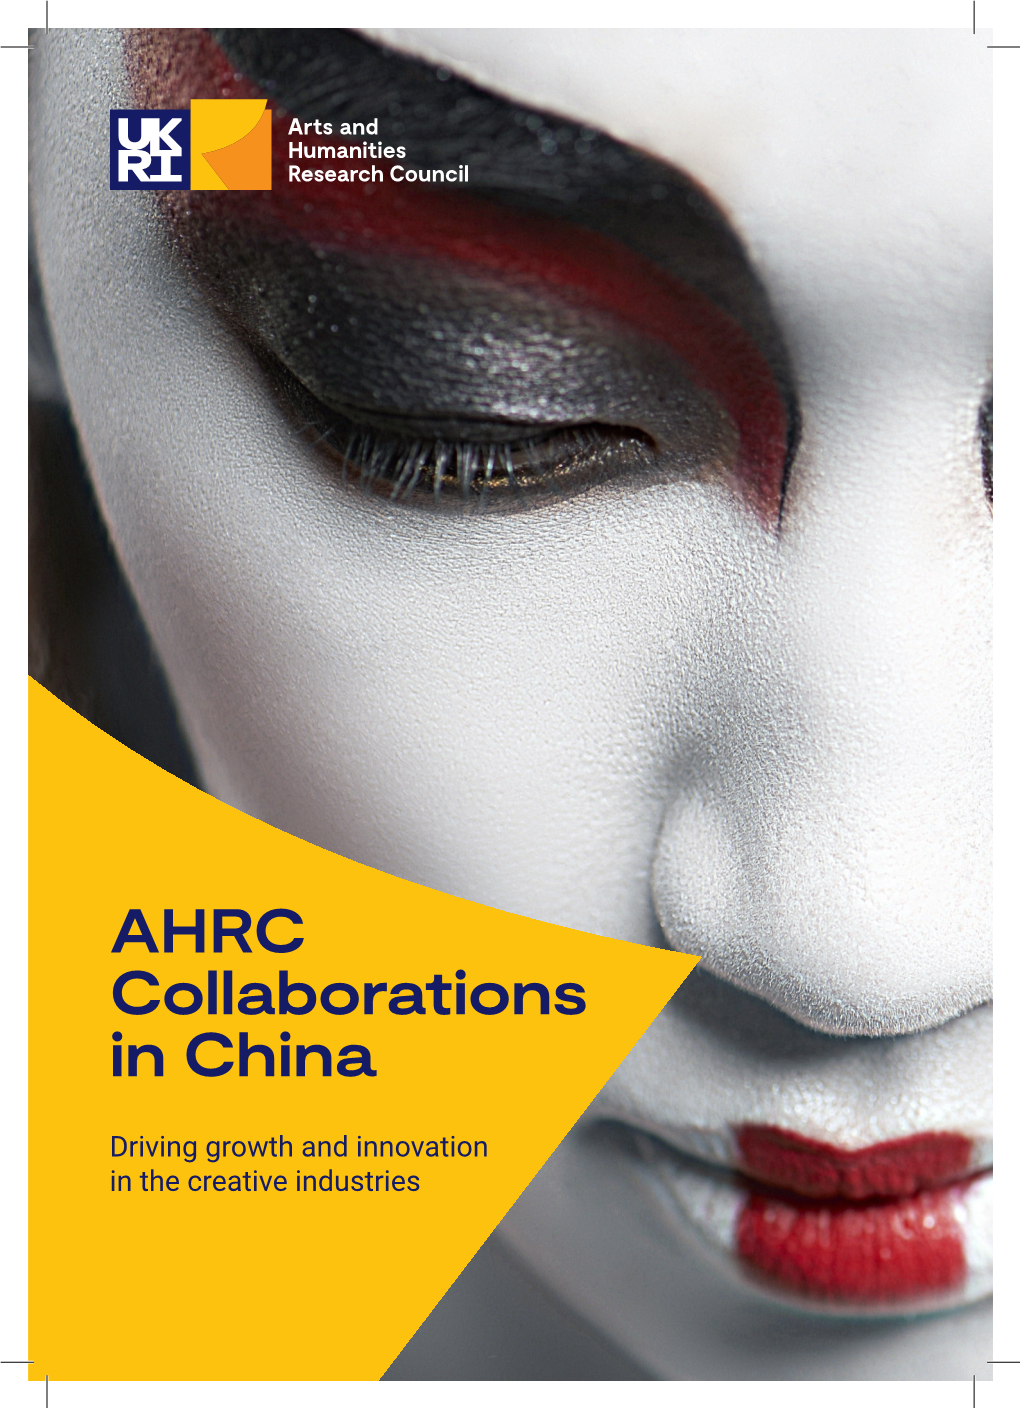 AHRC Collaborations in China